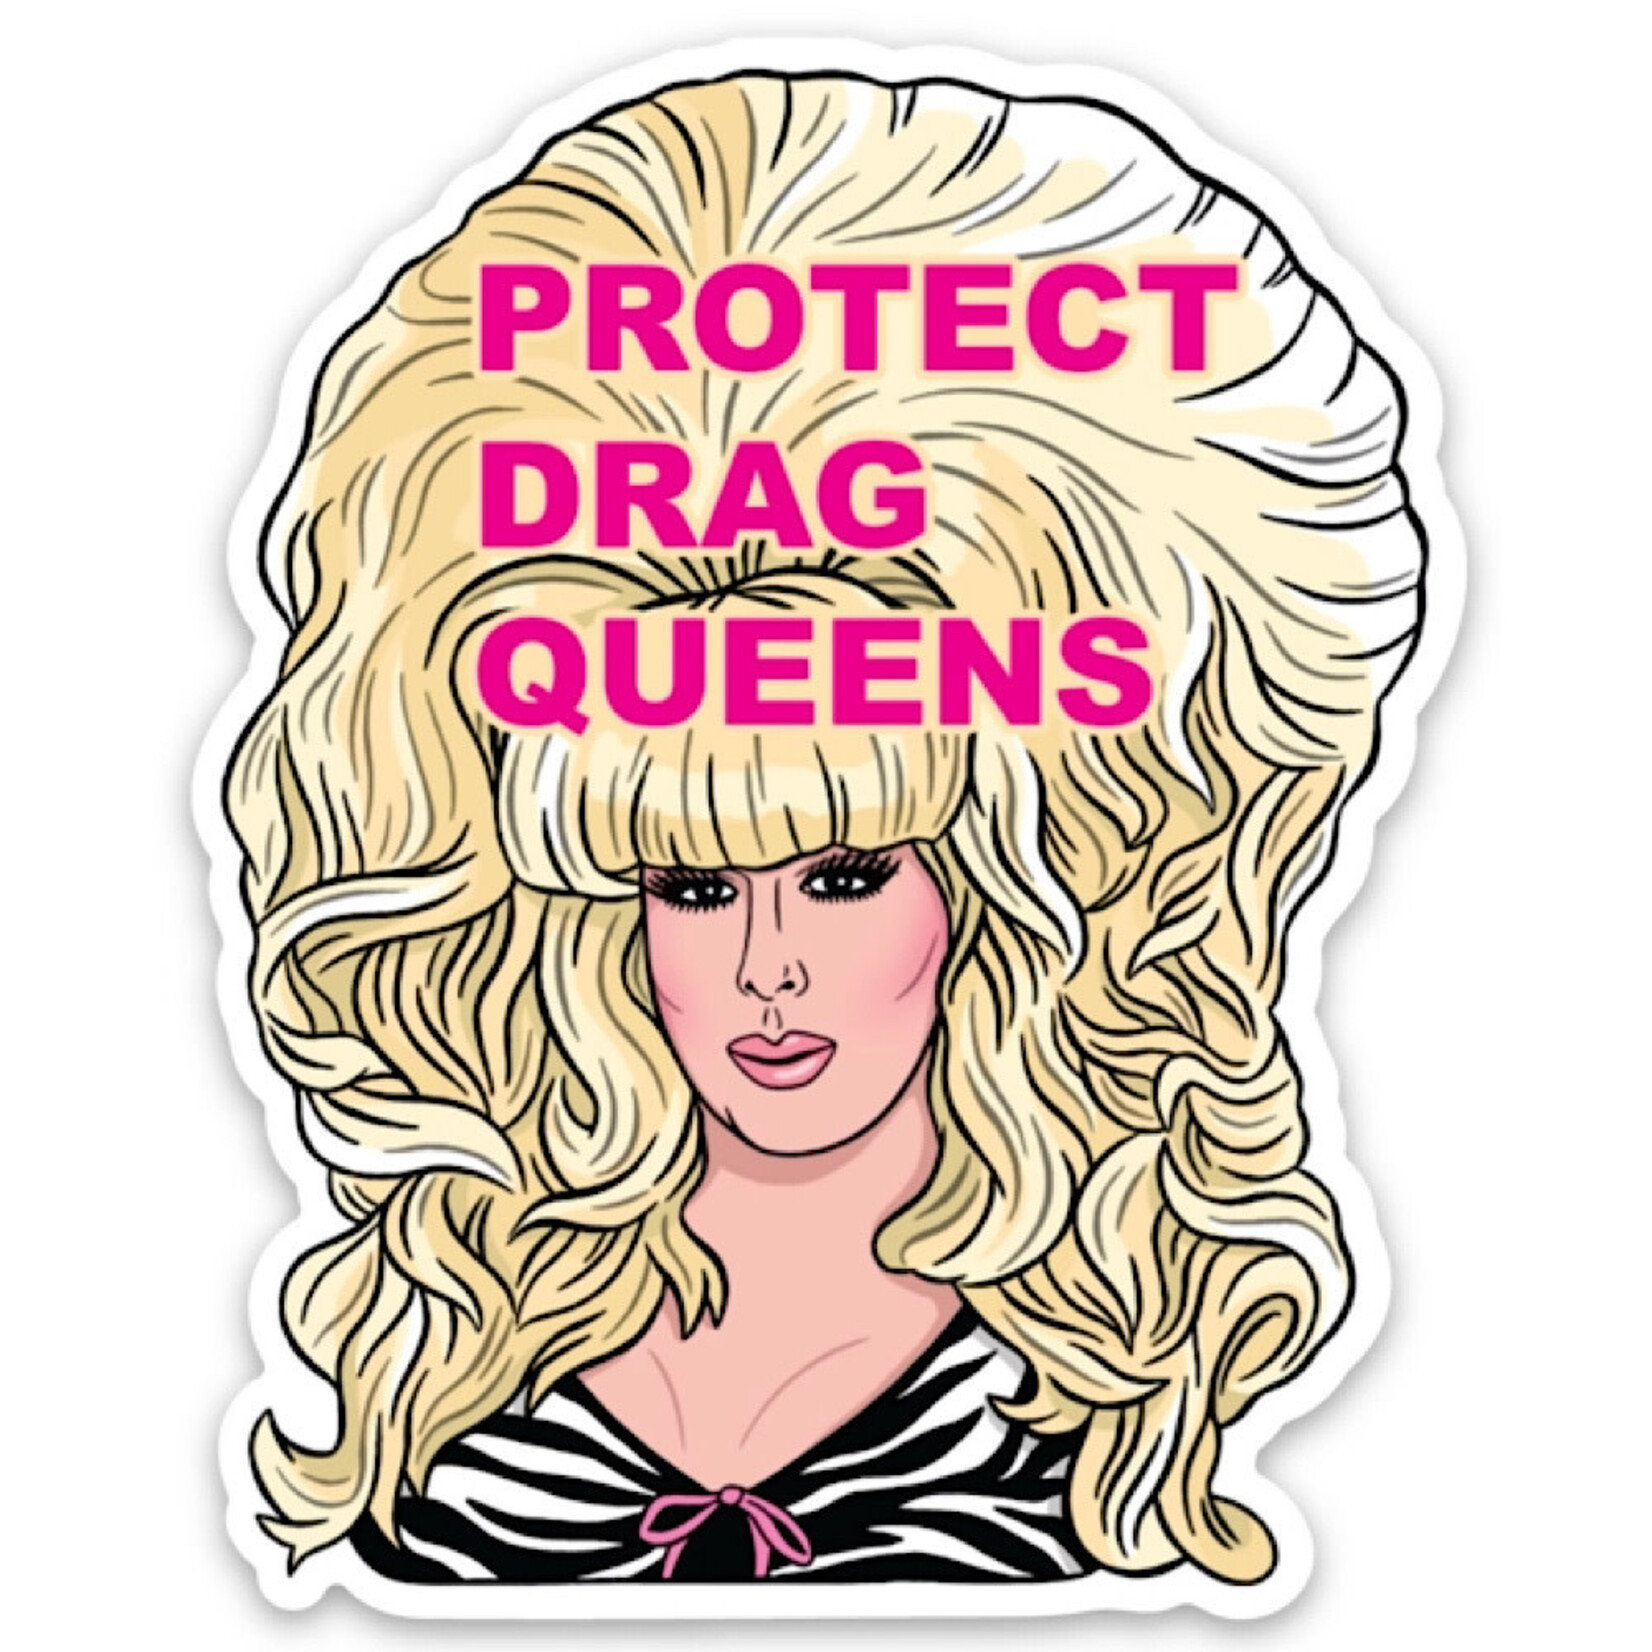 Sticker - Protect drag queens